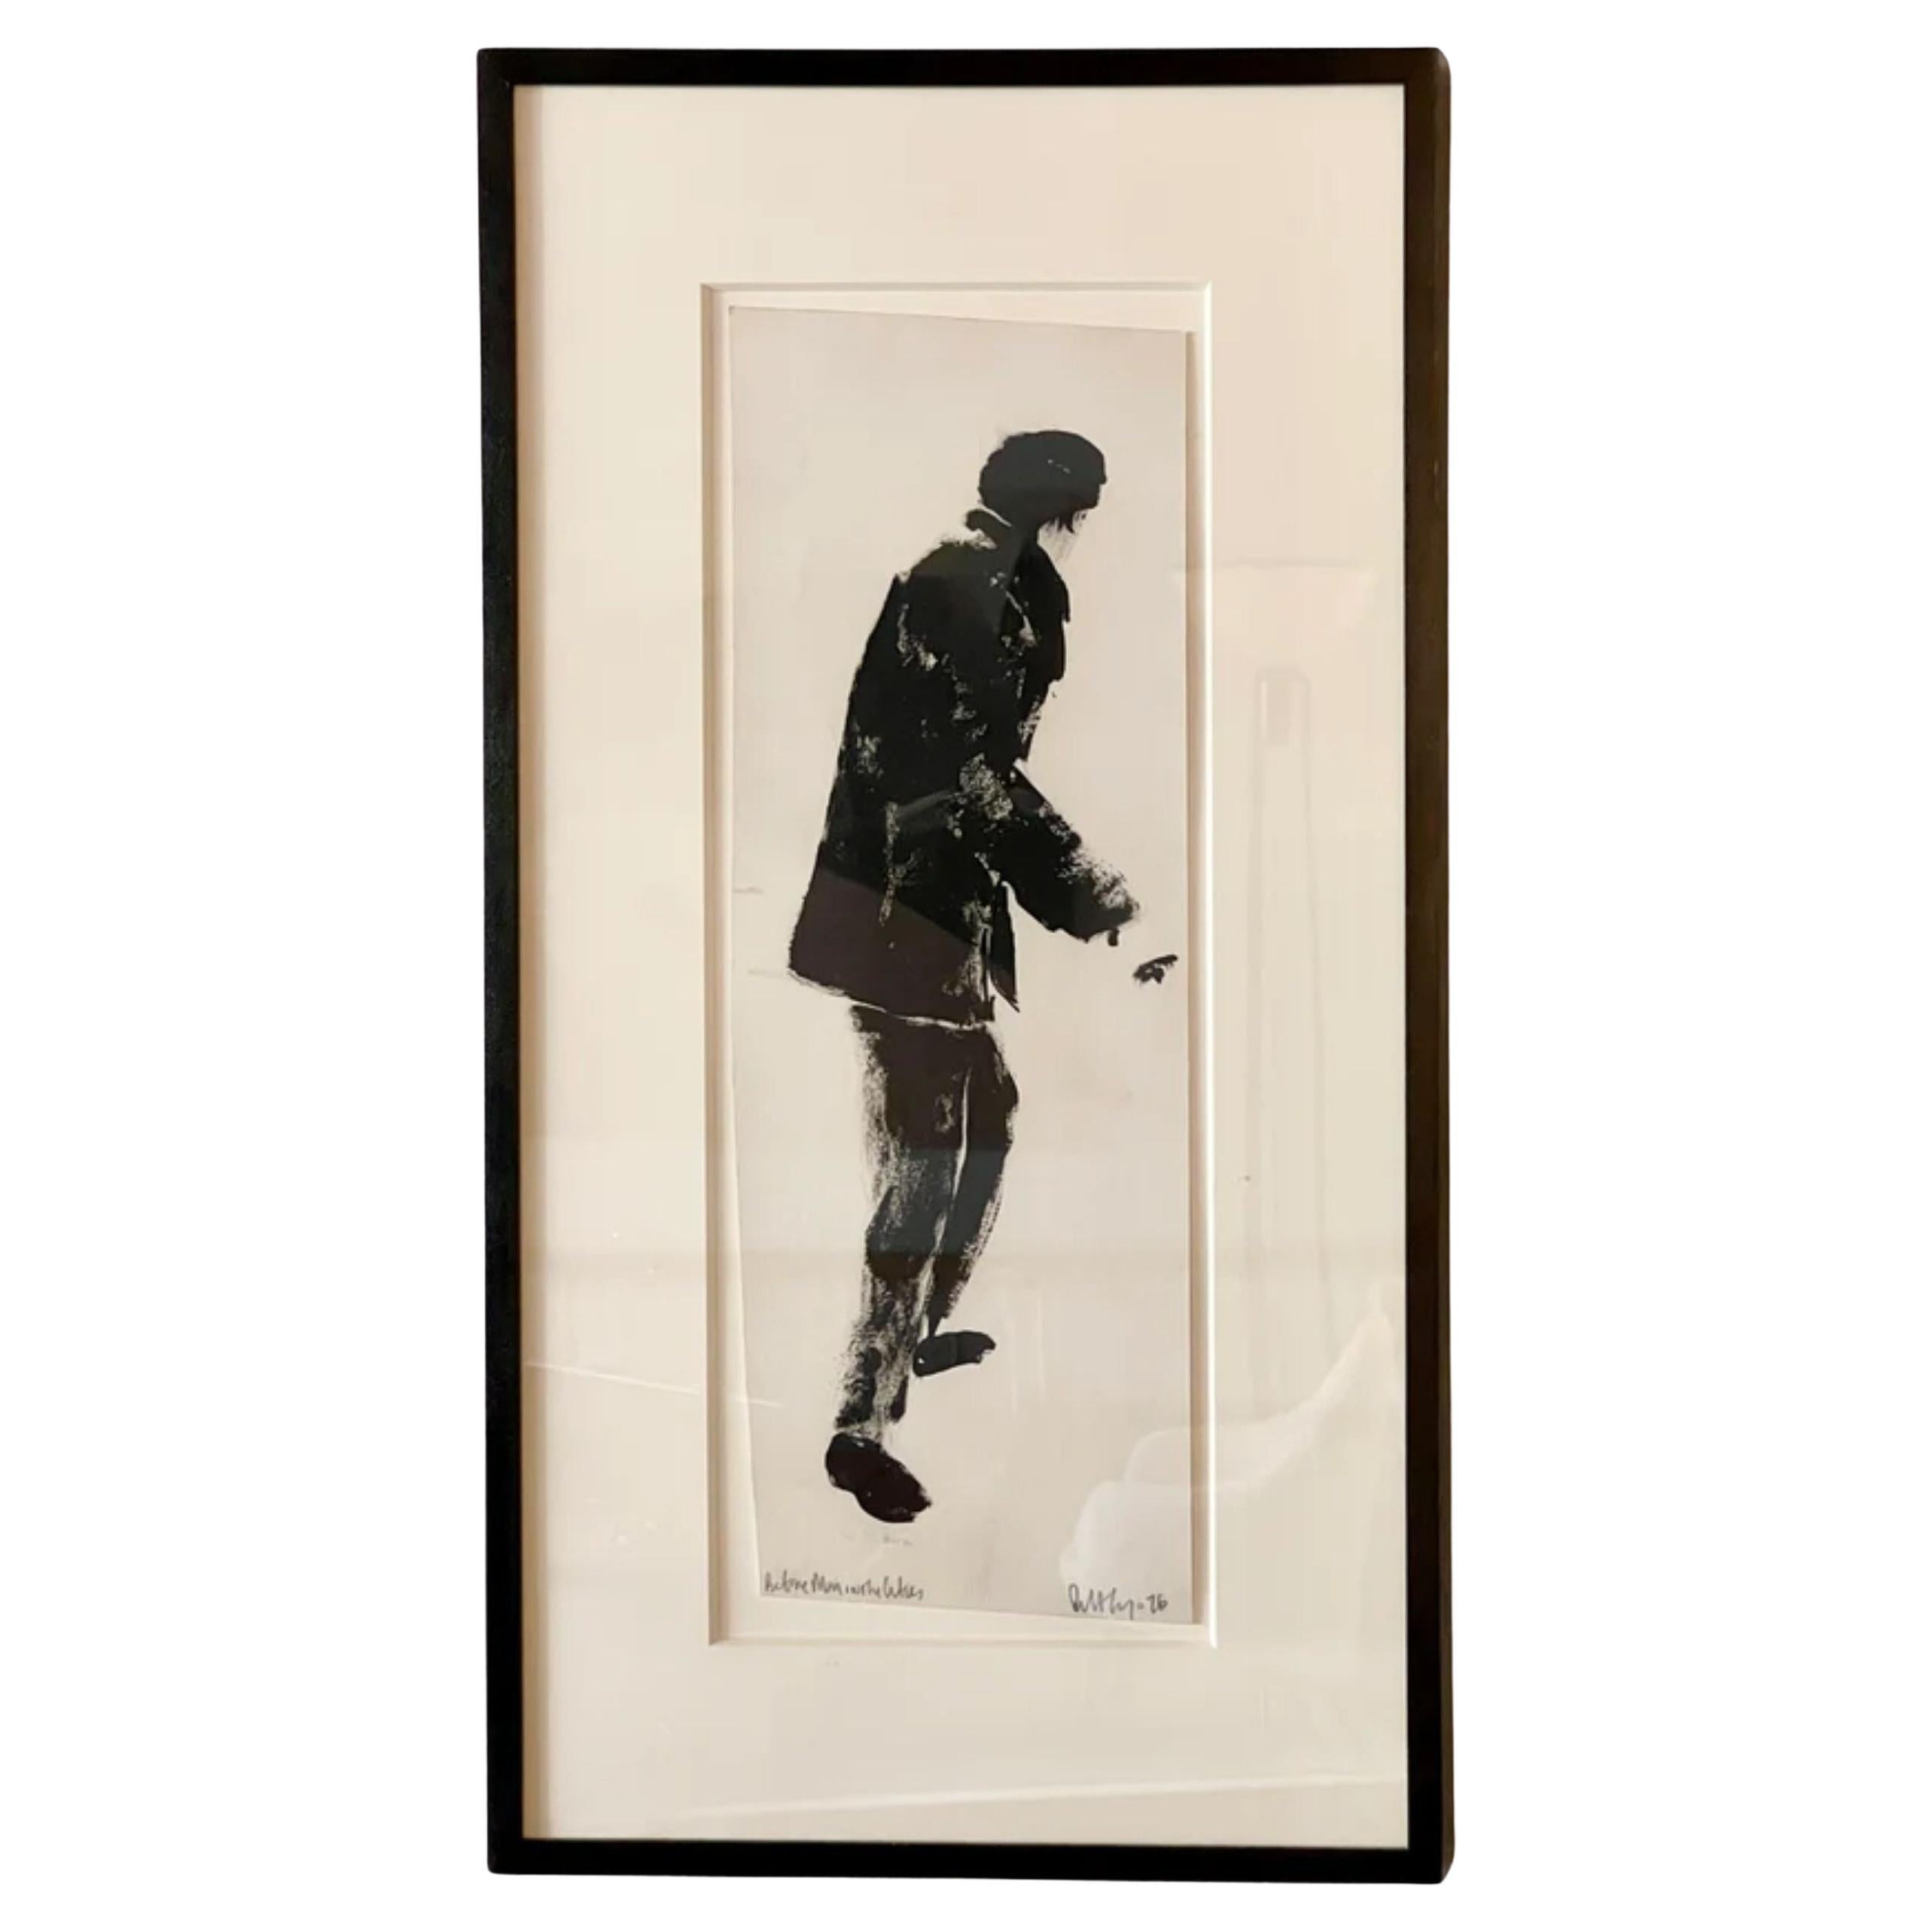 Stunning Framed Monotype Titled "Before Men in the Cities" by Robert Longo, 1976 For Sale